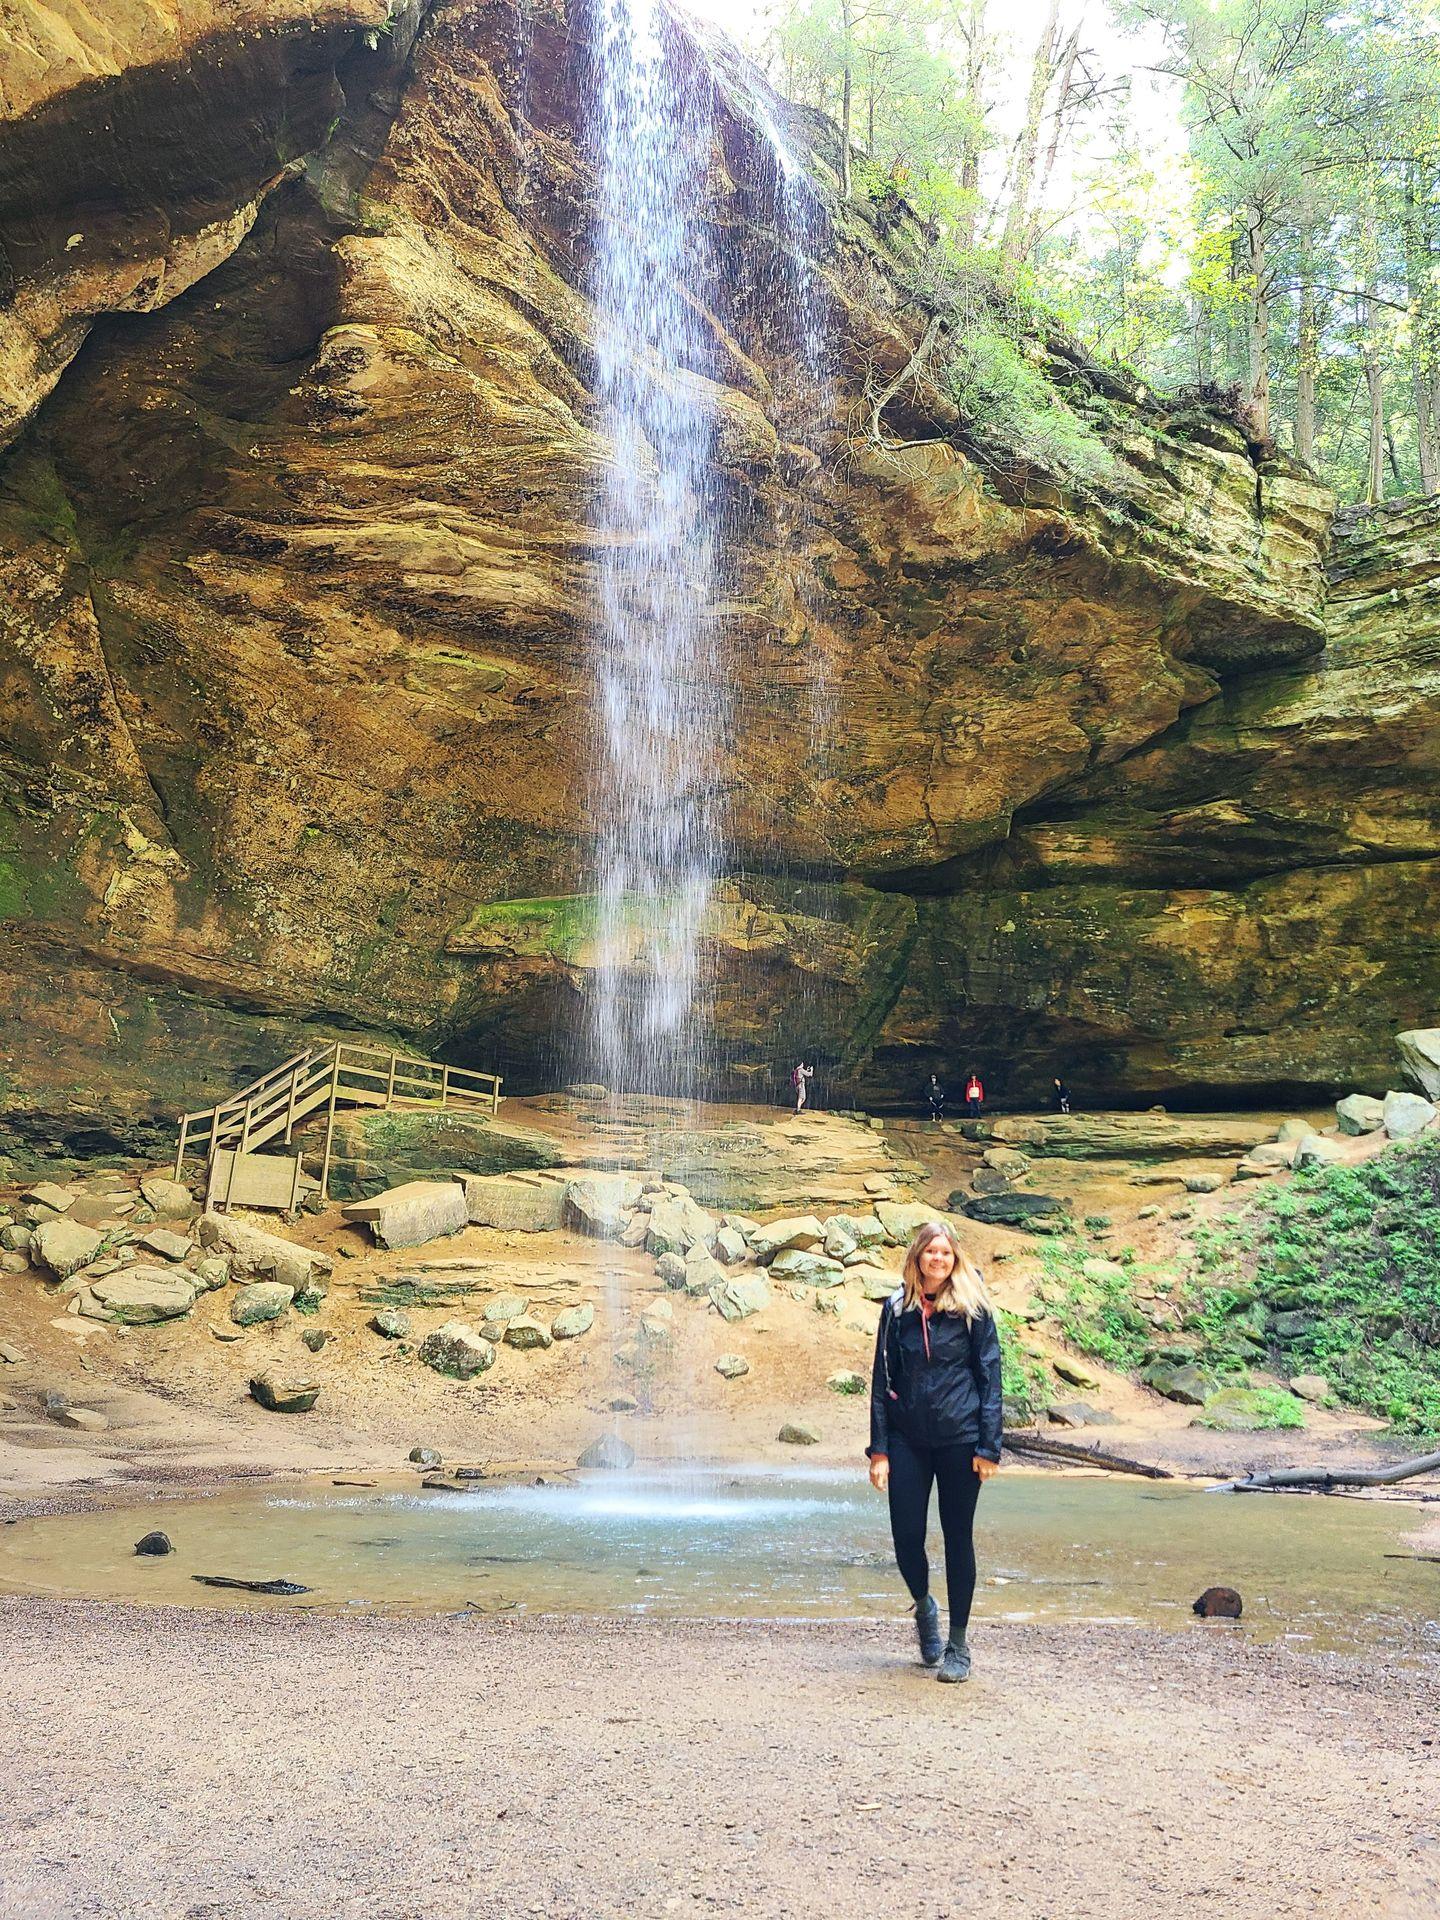 Lydia standing in front of the Ash Cave waterfall.